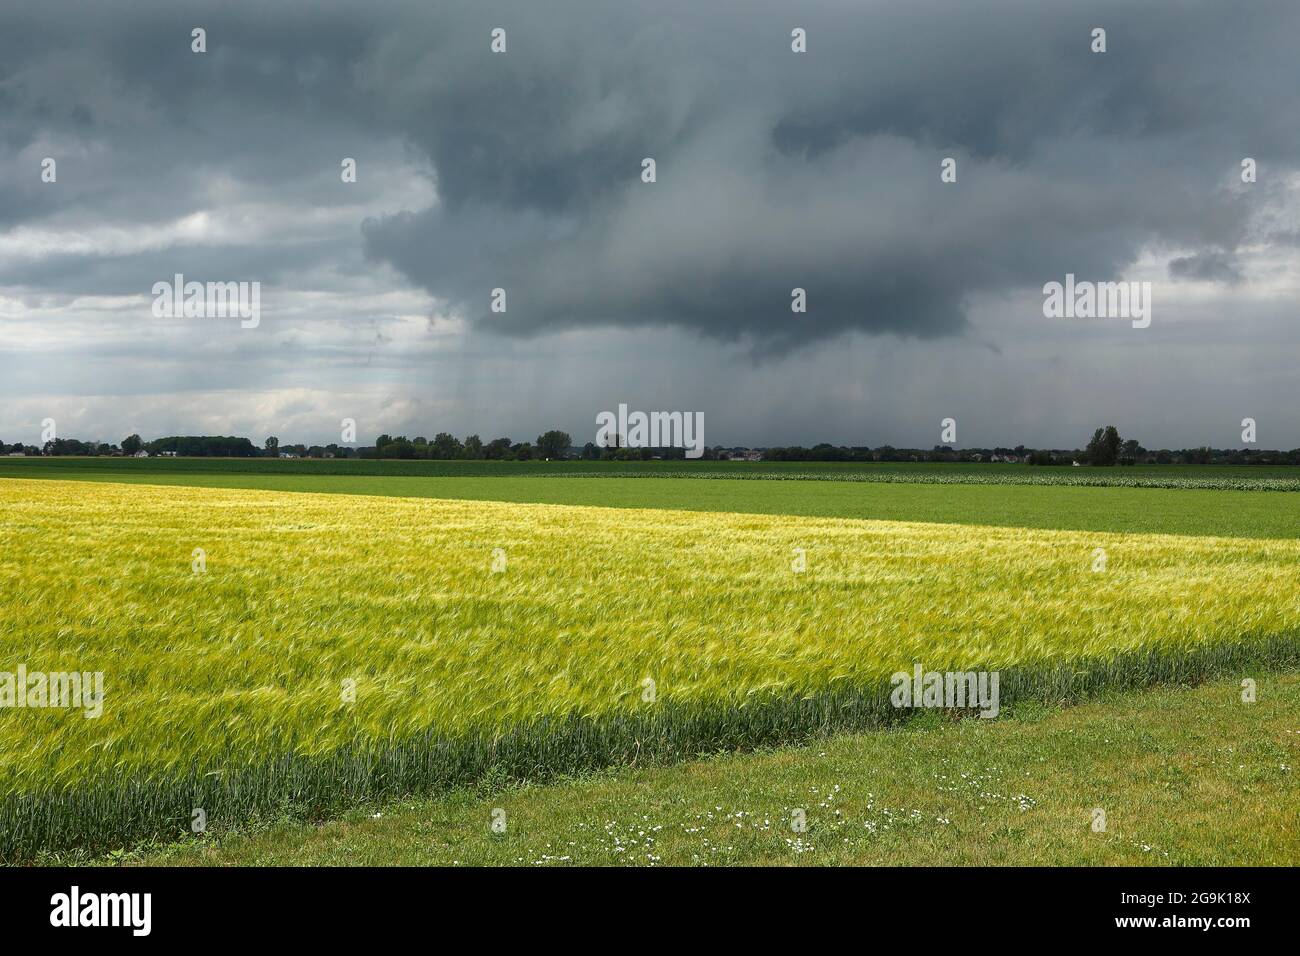 Storm clouds over farmland Province of Quebec, Canada Stock Photo